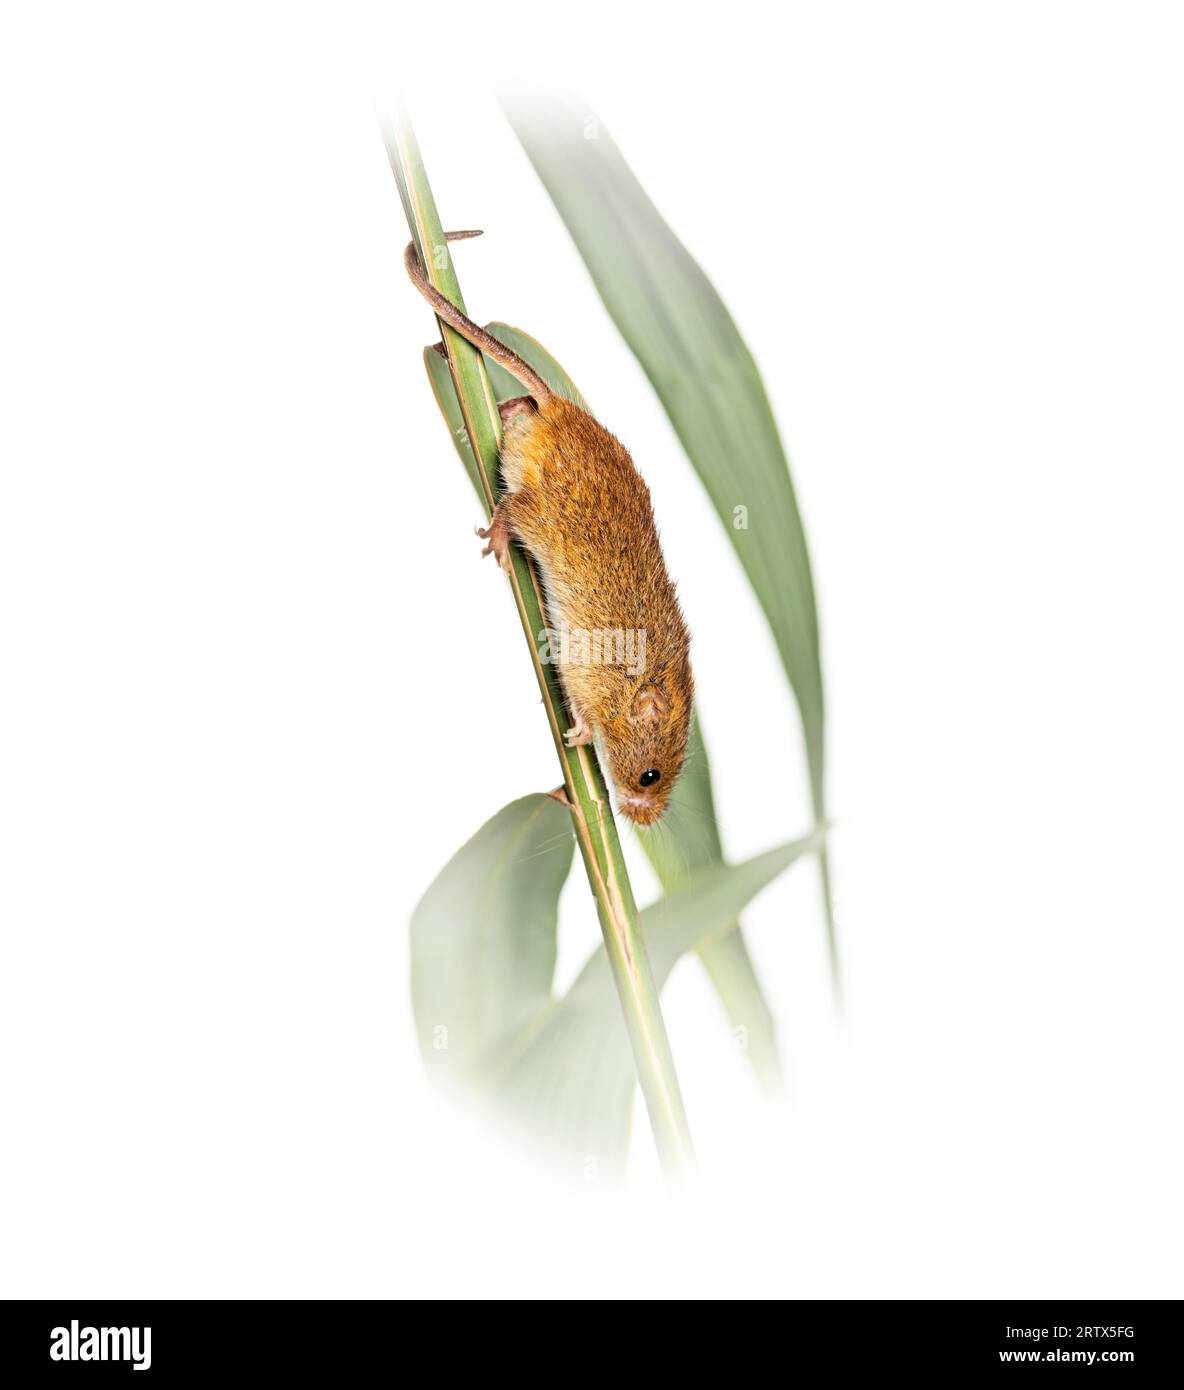 Harvest mouse, Micromys minutus, climbing holding and balancing with its tail on high grass, isolated on white Stock Photo